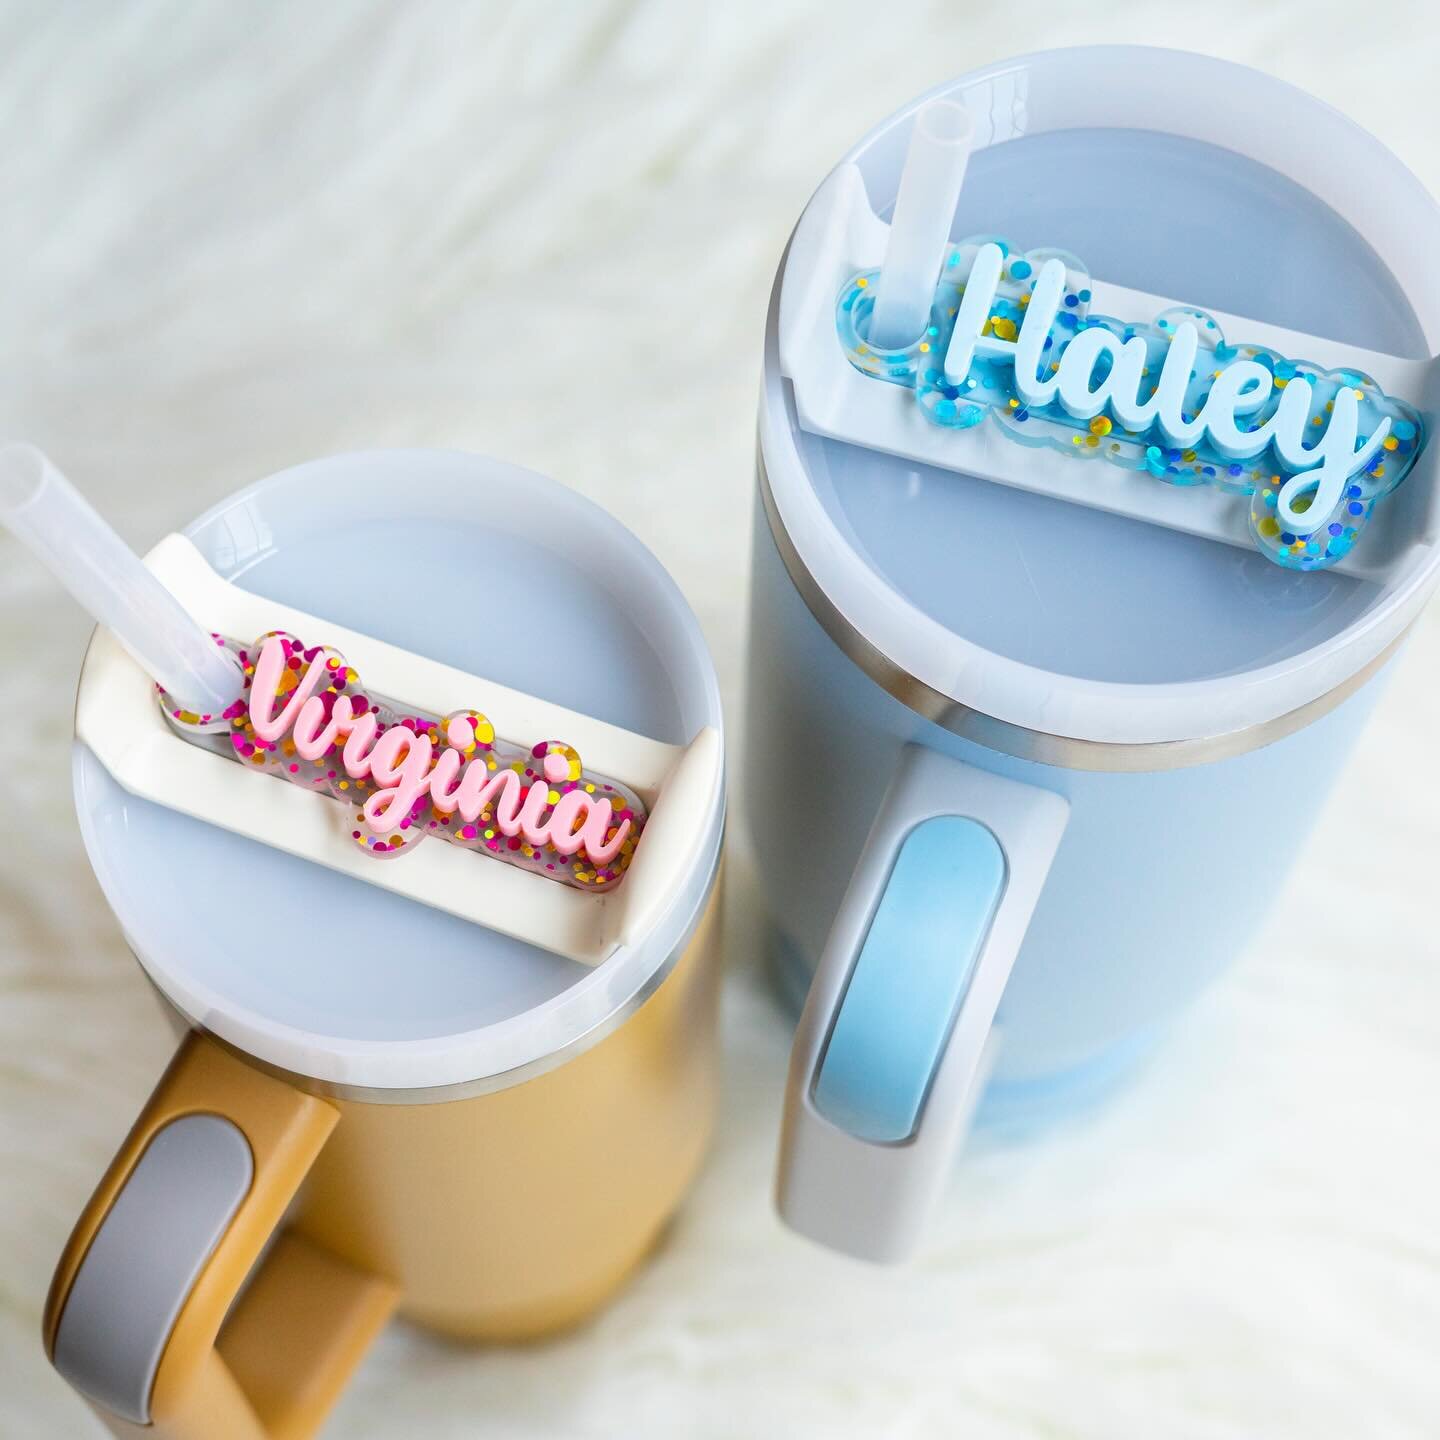 New product in the shop today! I love this one and plan to make keychains/backpack/suitcase tags like this as well. Will likely post those later this week😉
I love how they are cut to mirror the outline of the custom name.

#stanley #stanleytumbler #